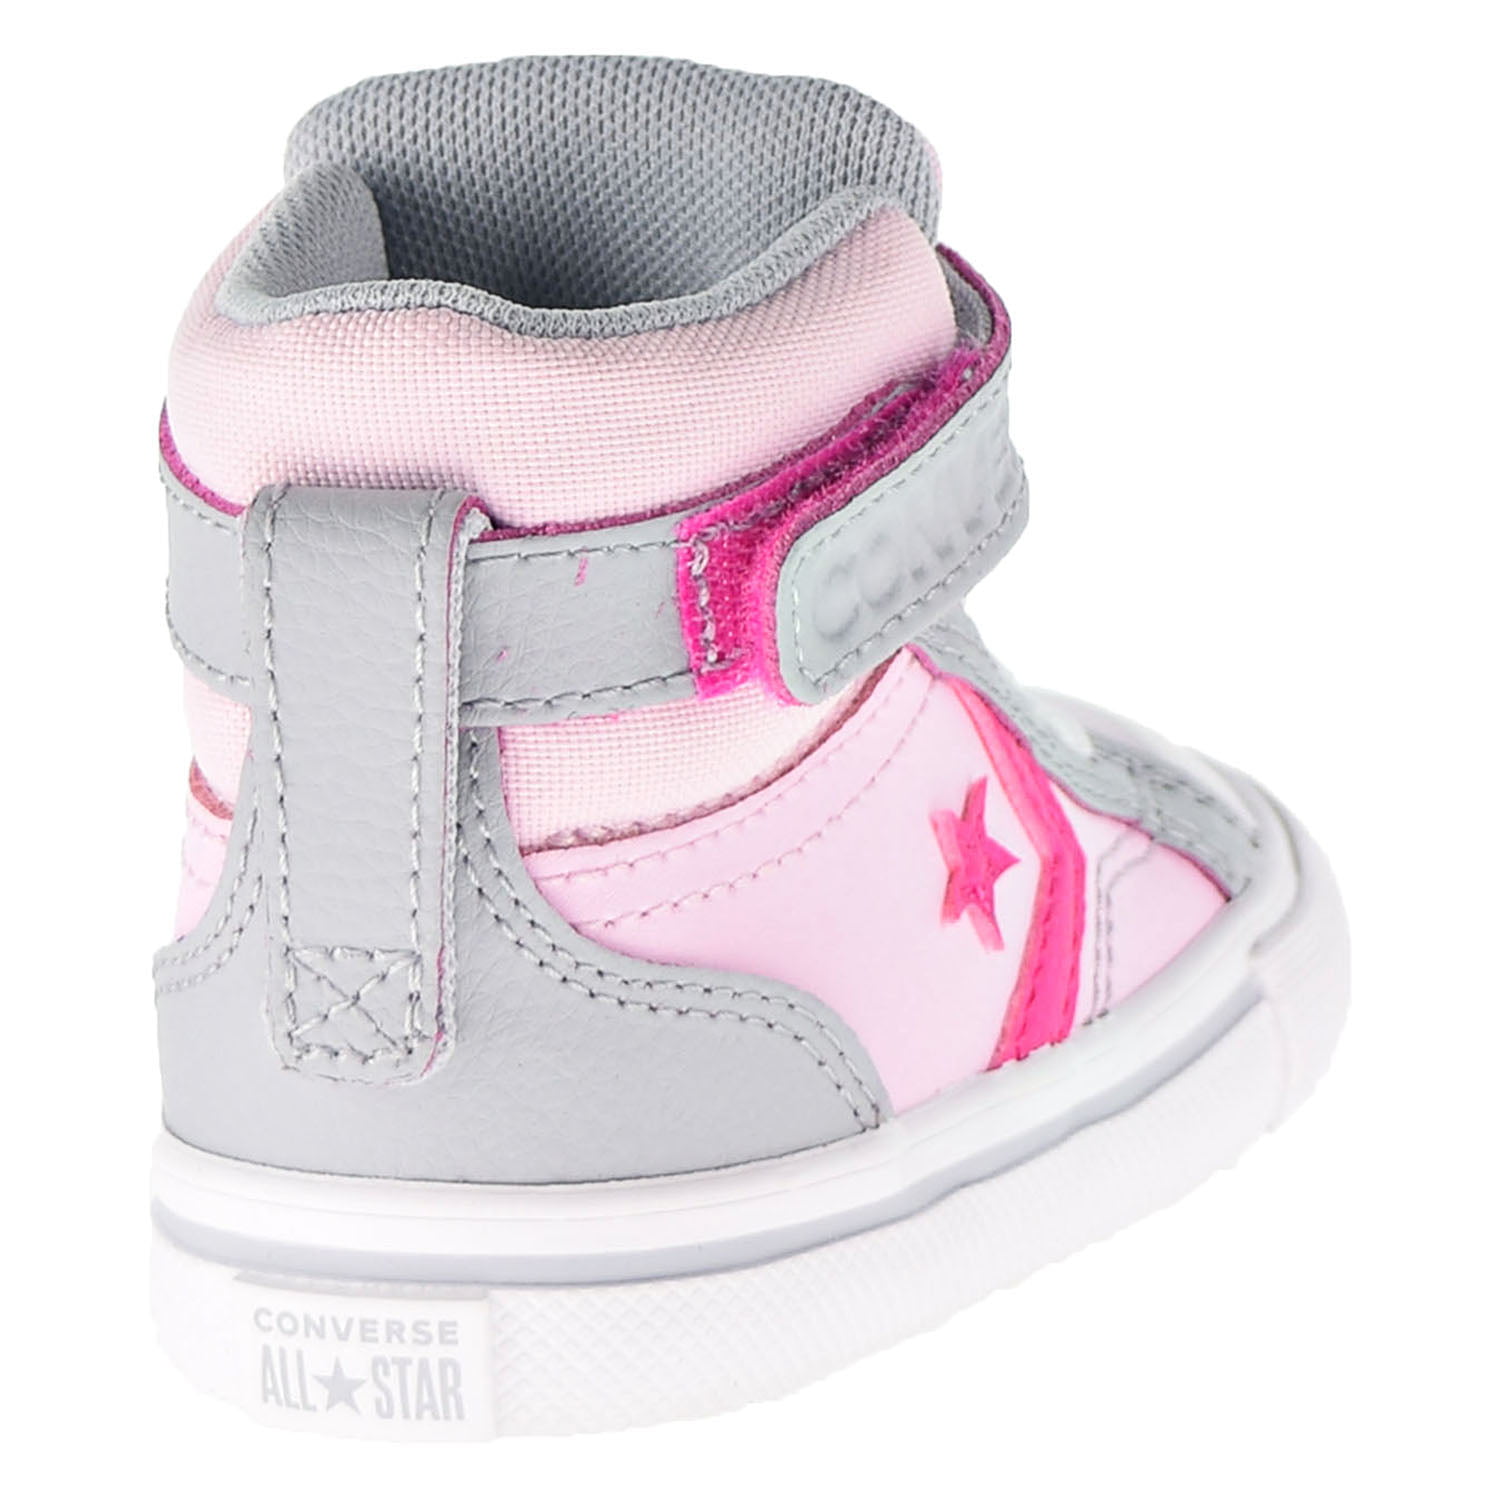 Converse Leather Strap Grey 766052c Hi Blaze (2 Two-Tone Pink US) Toddler M Pro Foam-Wolf Shoes